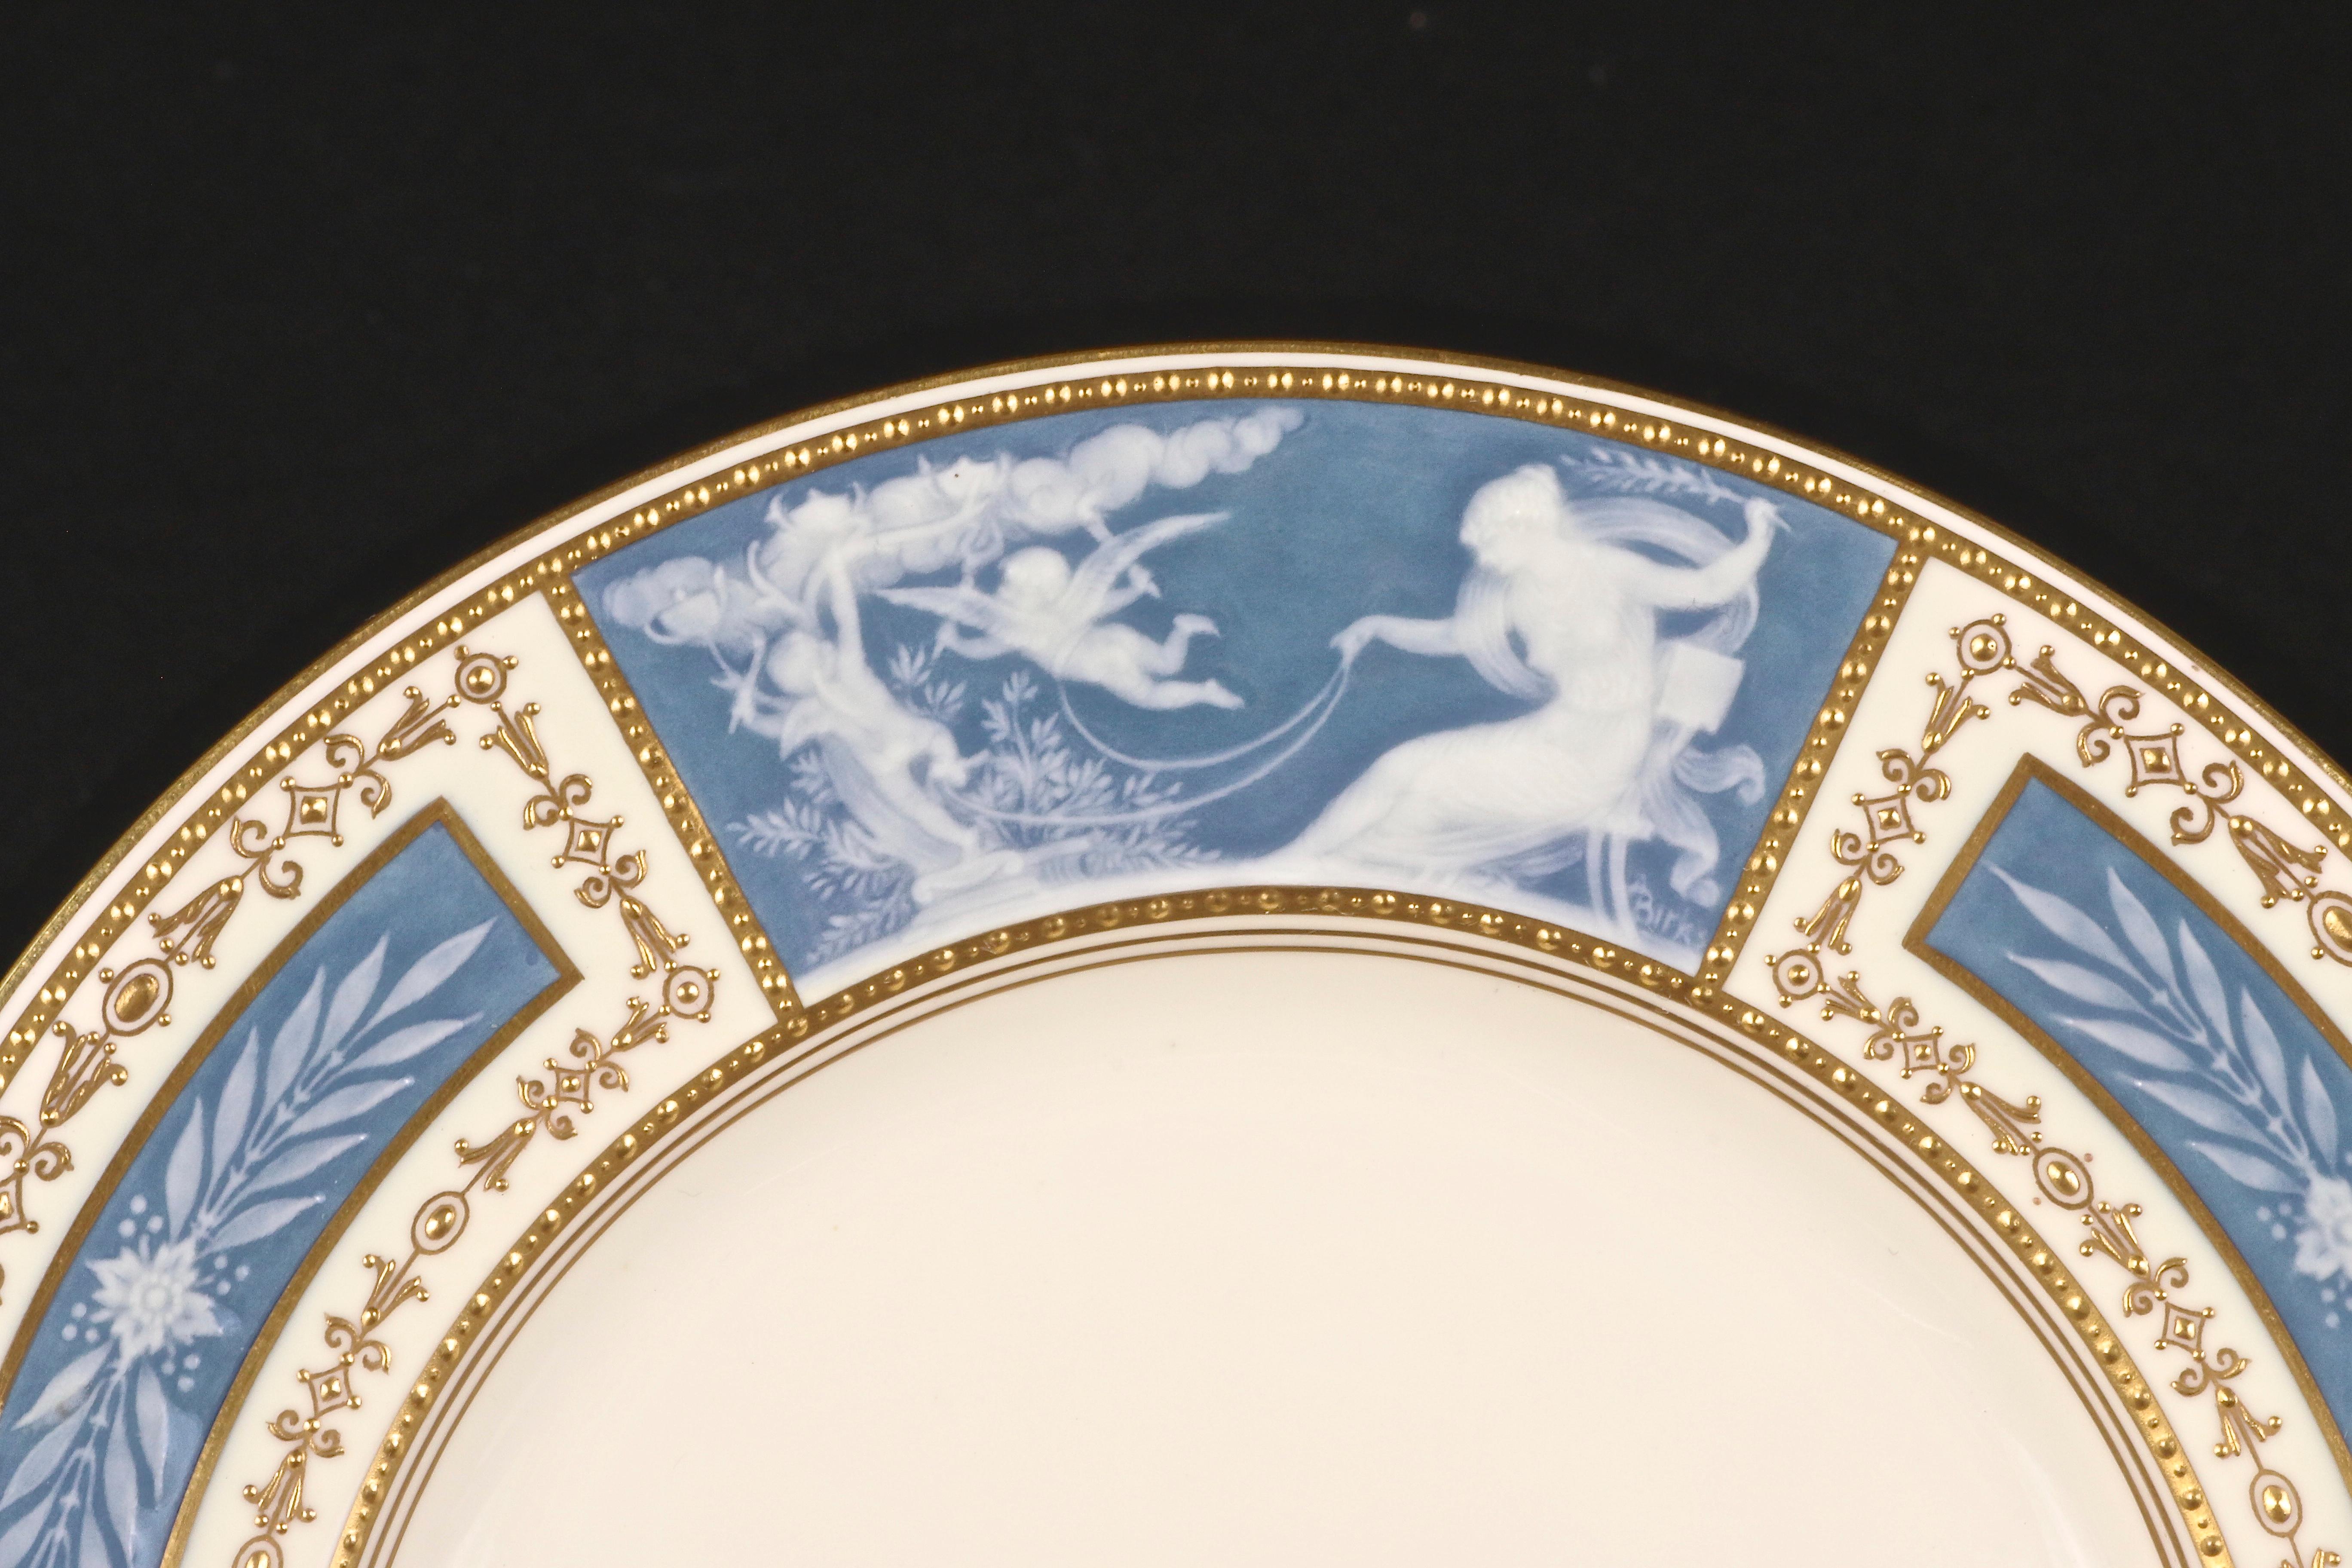 8 Minton Pate-sur-pate Blue Plates for Tiffany, by Artist Albion Birks For Sale 1